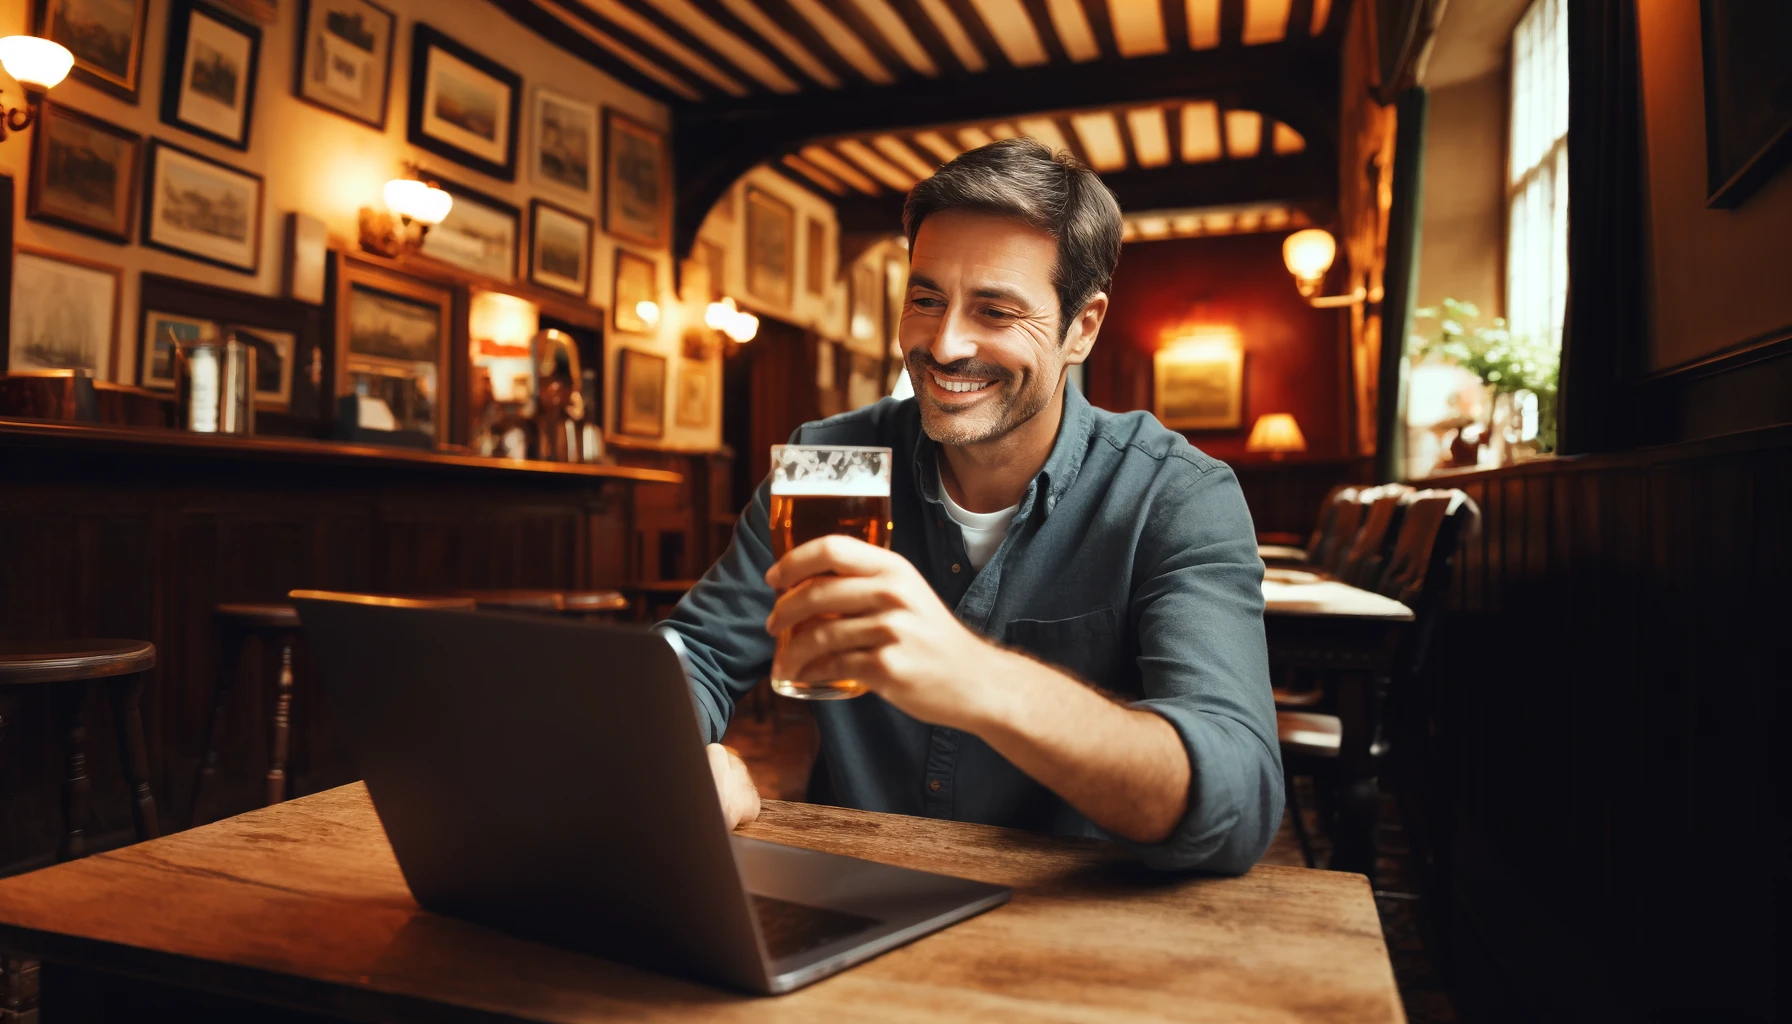 A man sitting in a pub with a pint of beer in his hand, looking at a laptop screen and smiling. Perhaps he is looking at our SEO results and celebrating with a pint!